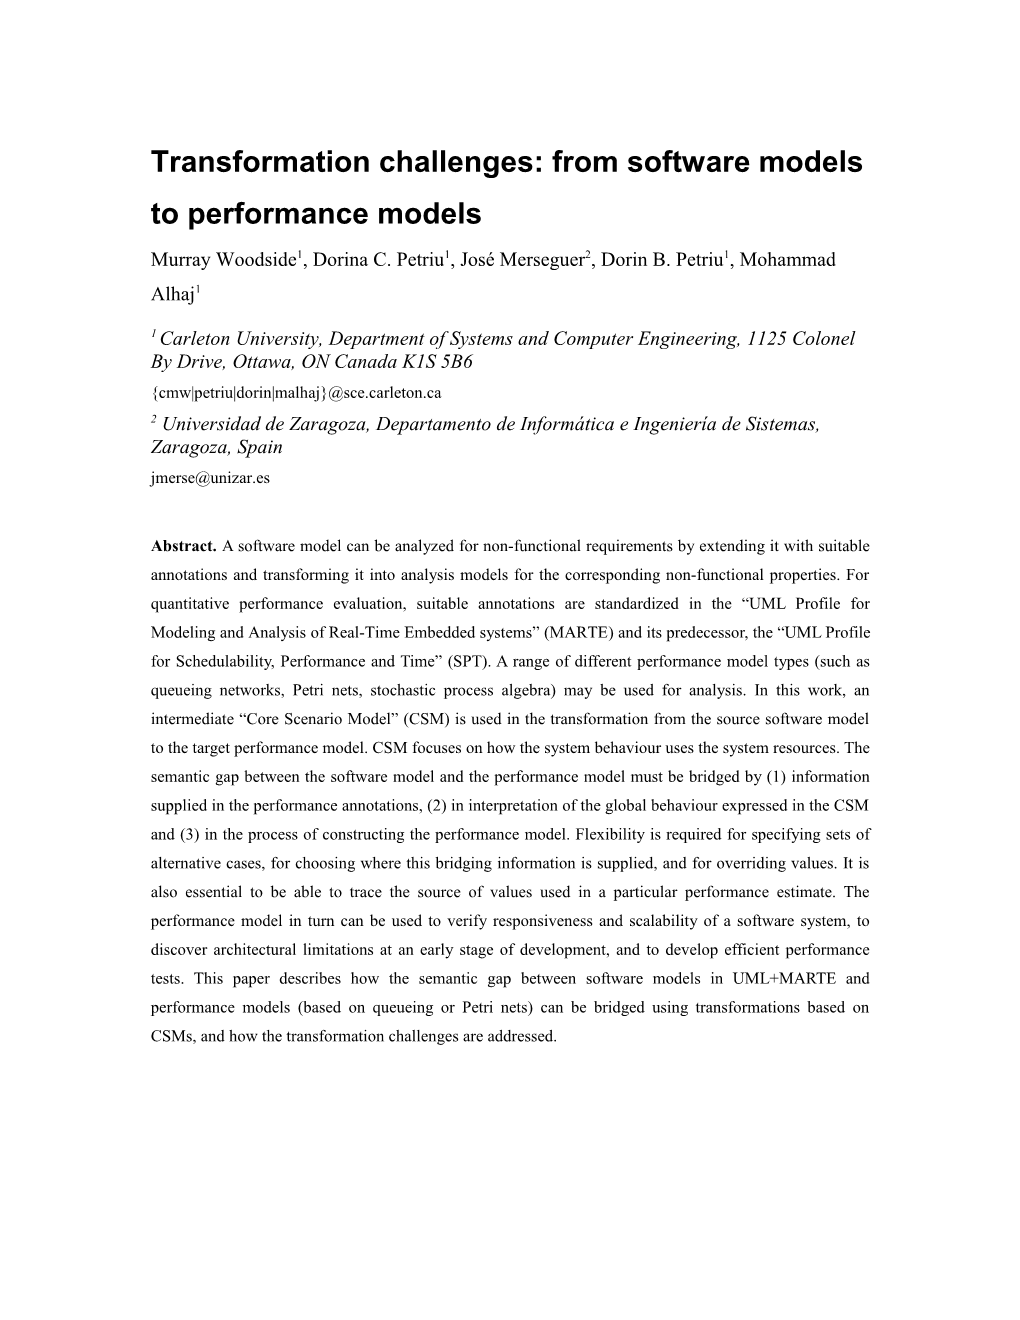 Model Transformation from Software To